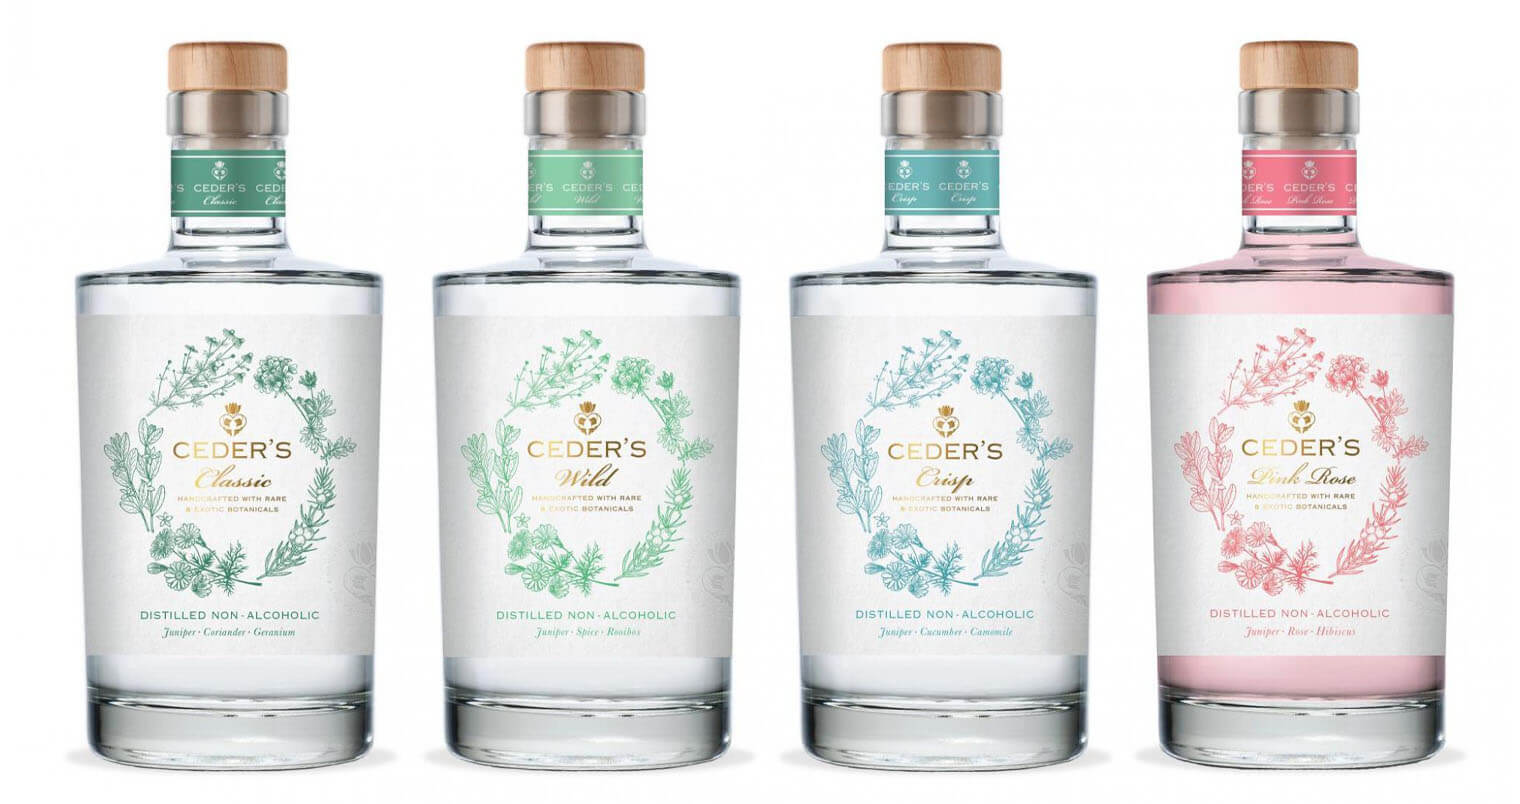 CEDER'S Gin Bottles, featured image